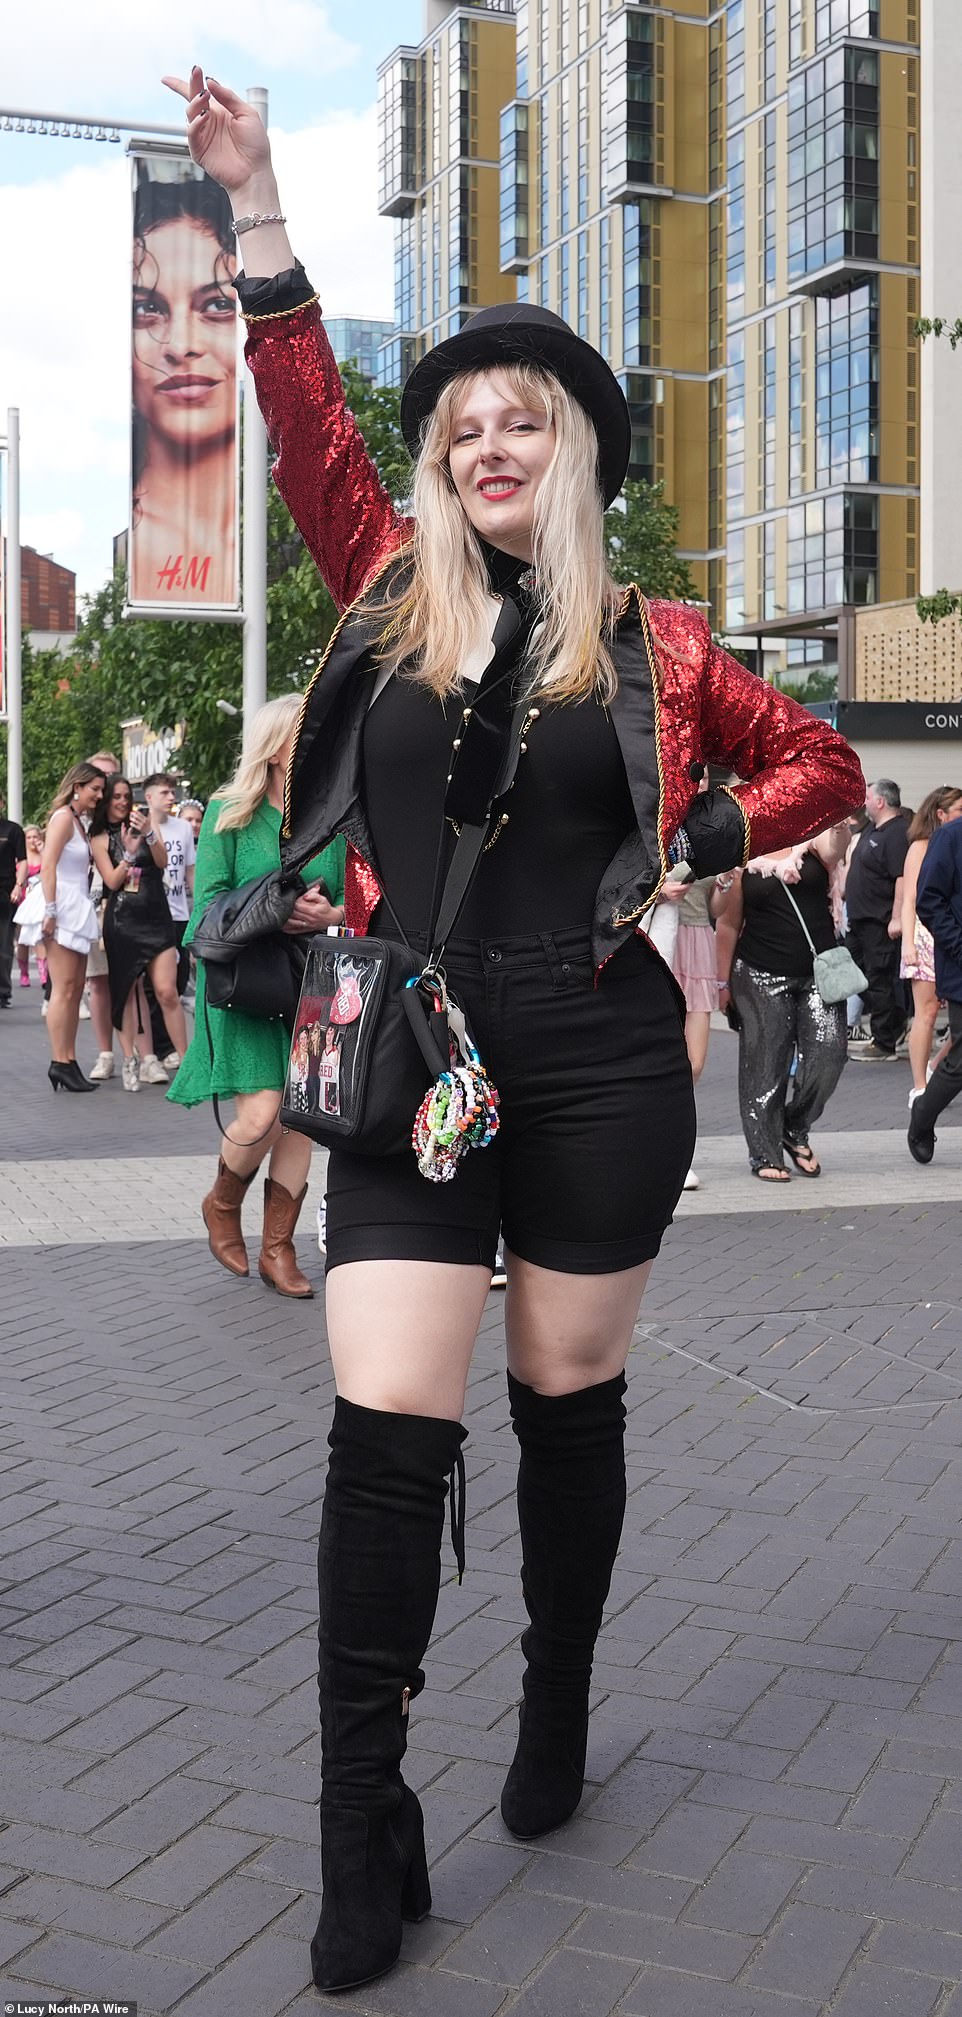 A fan recreates the ringmaster outfit Swift wore at the 2012 MTV Europe Music Awards. She also has friendship bracelets tied to her waist to hand out at the concert